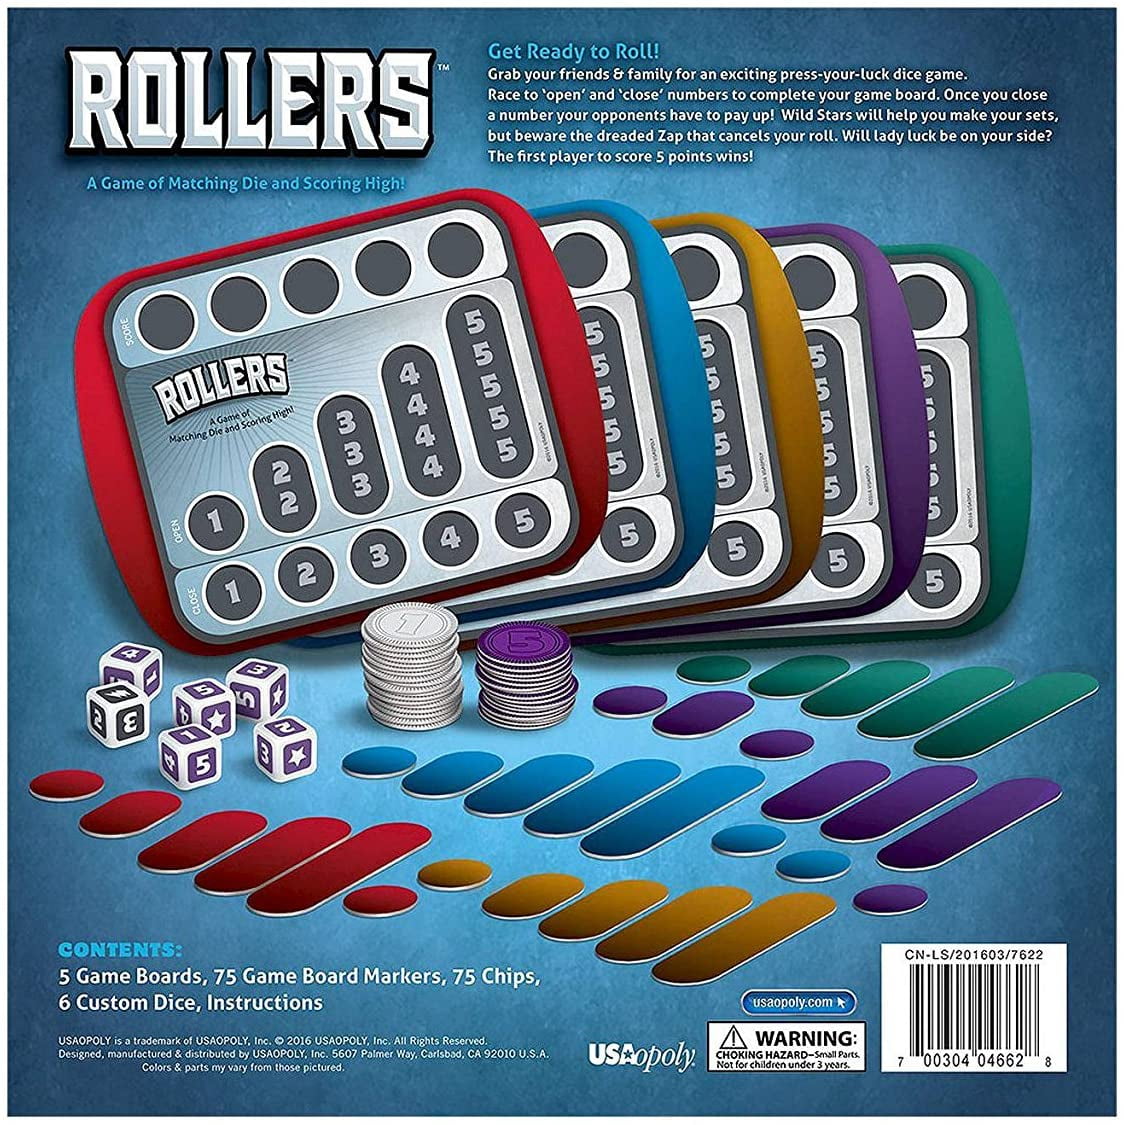 Dice roller / Compatible with #GoForItApp